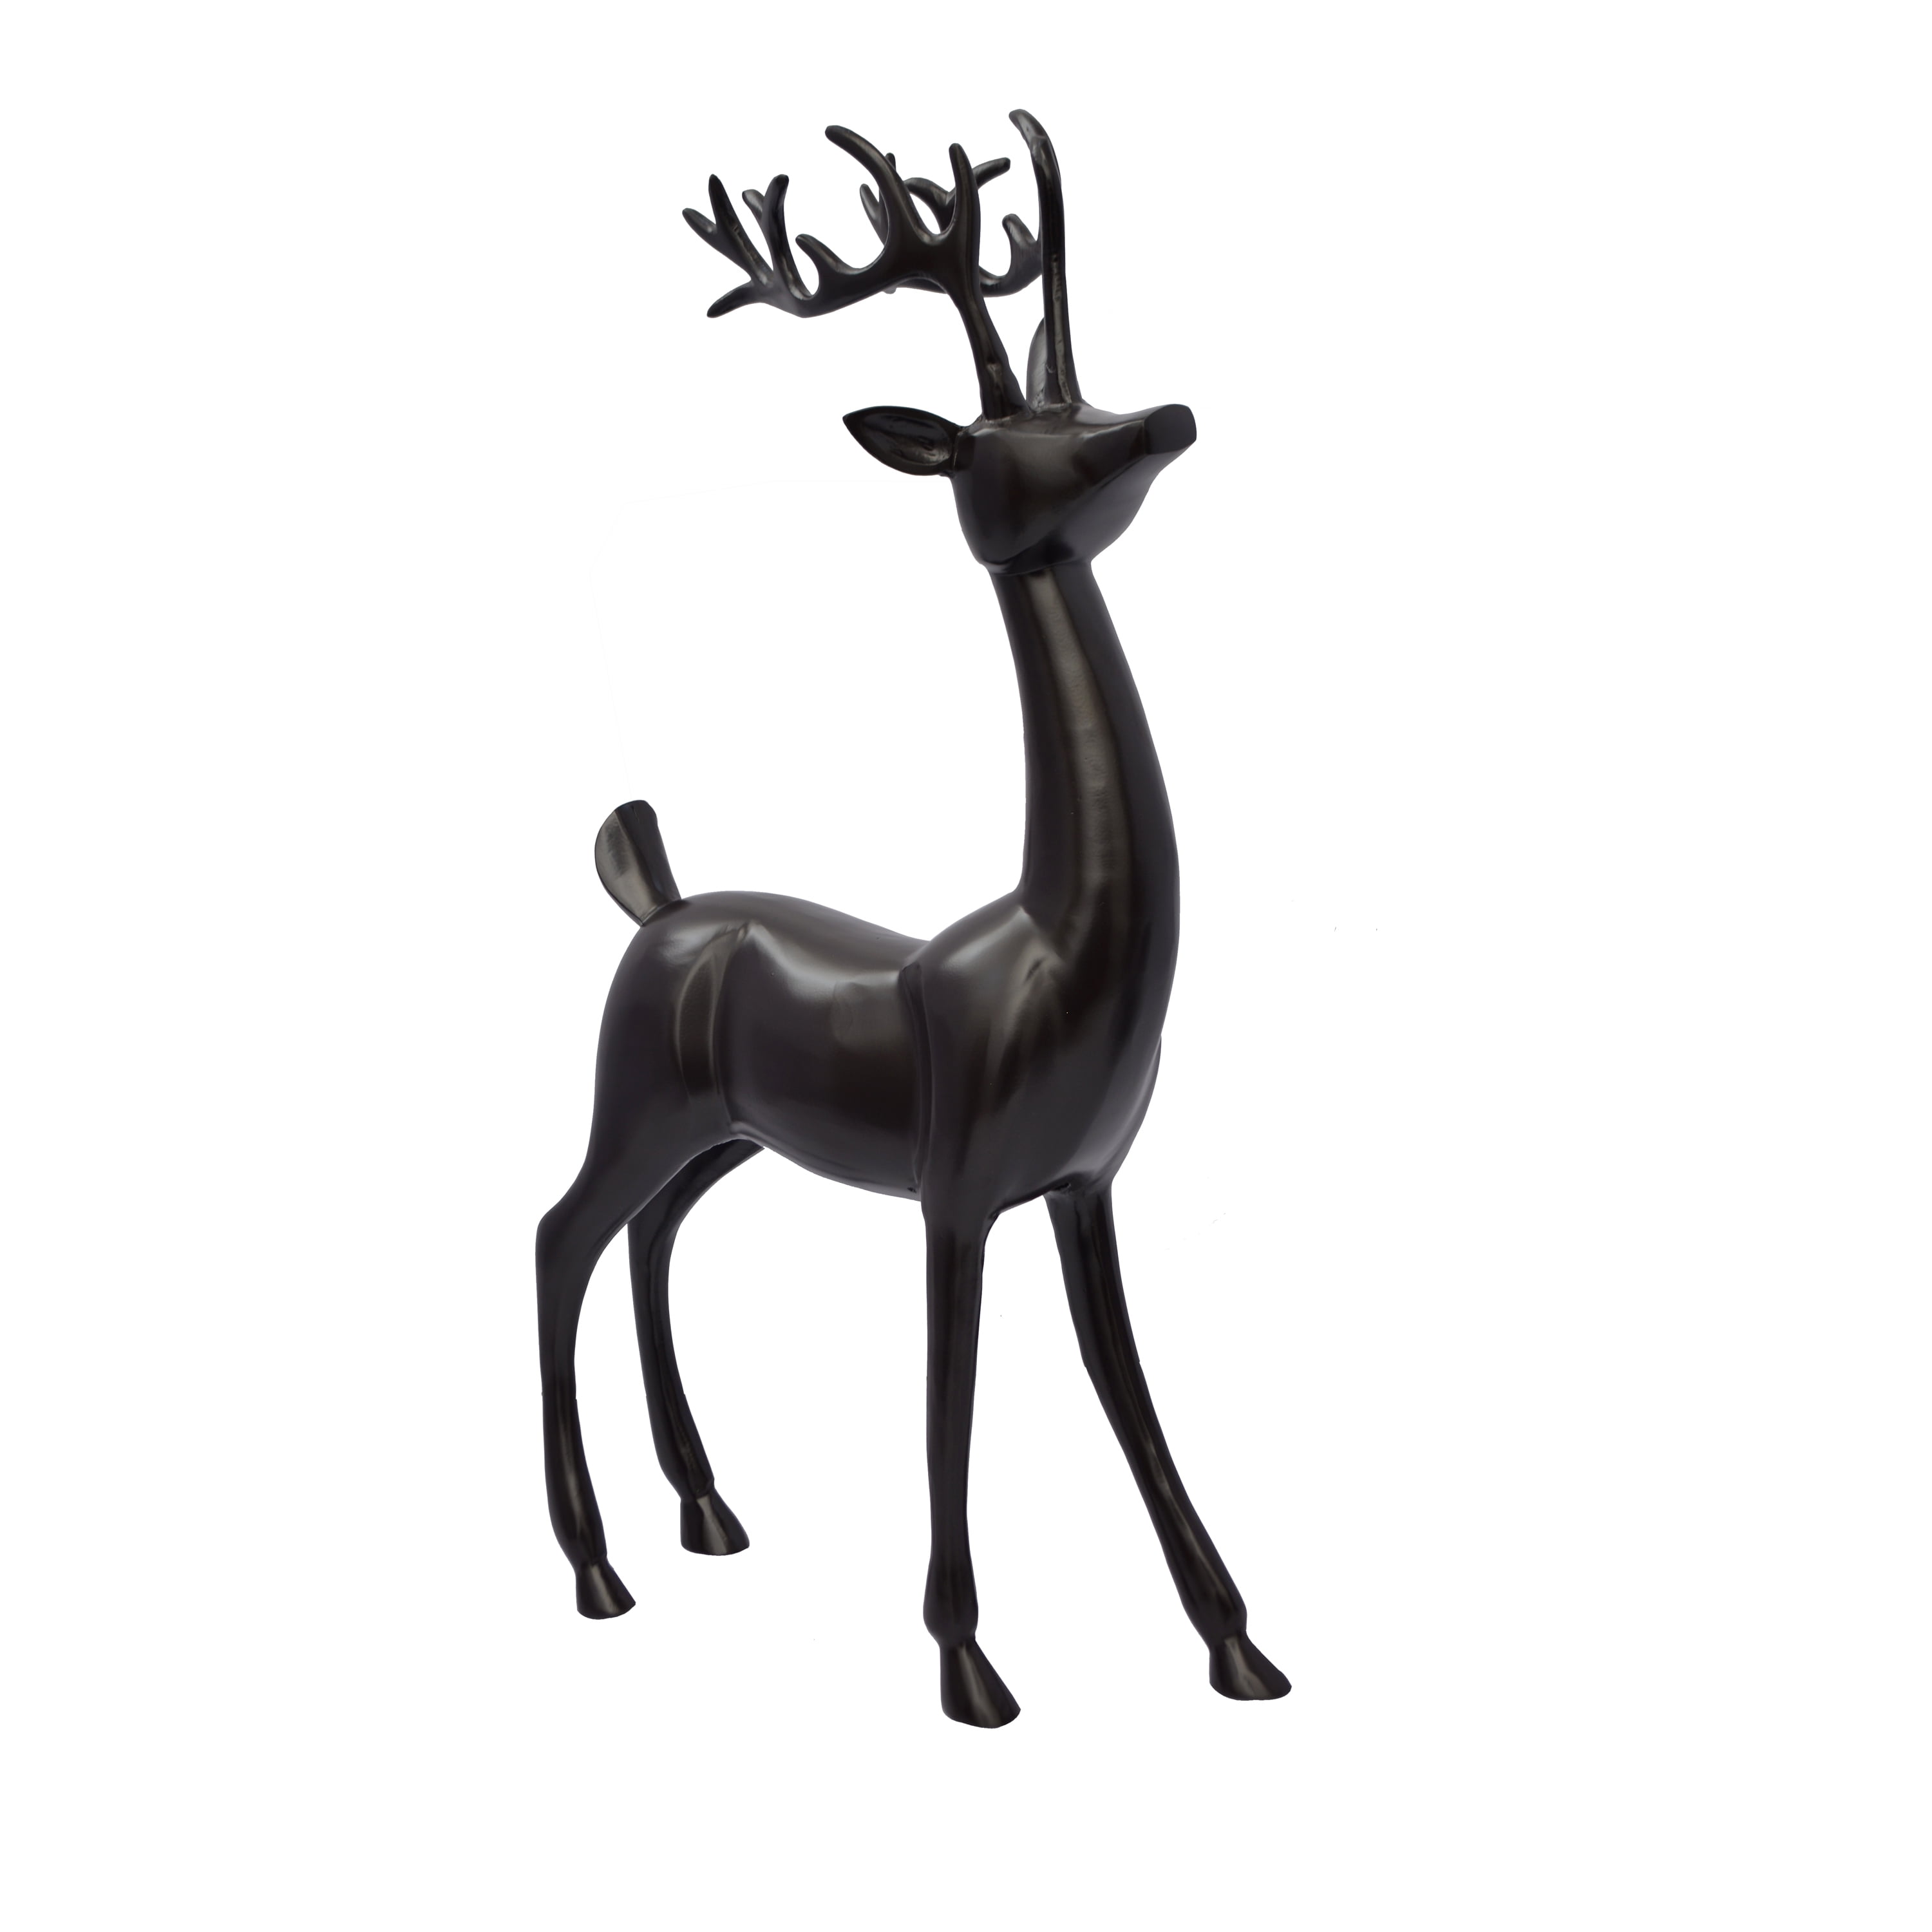 Metal Casted Reindeer Christmas Outdoor Décor in Black Finish, 30 inch ...